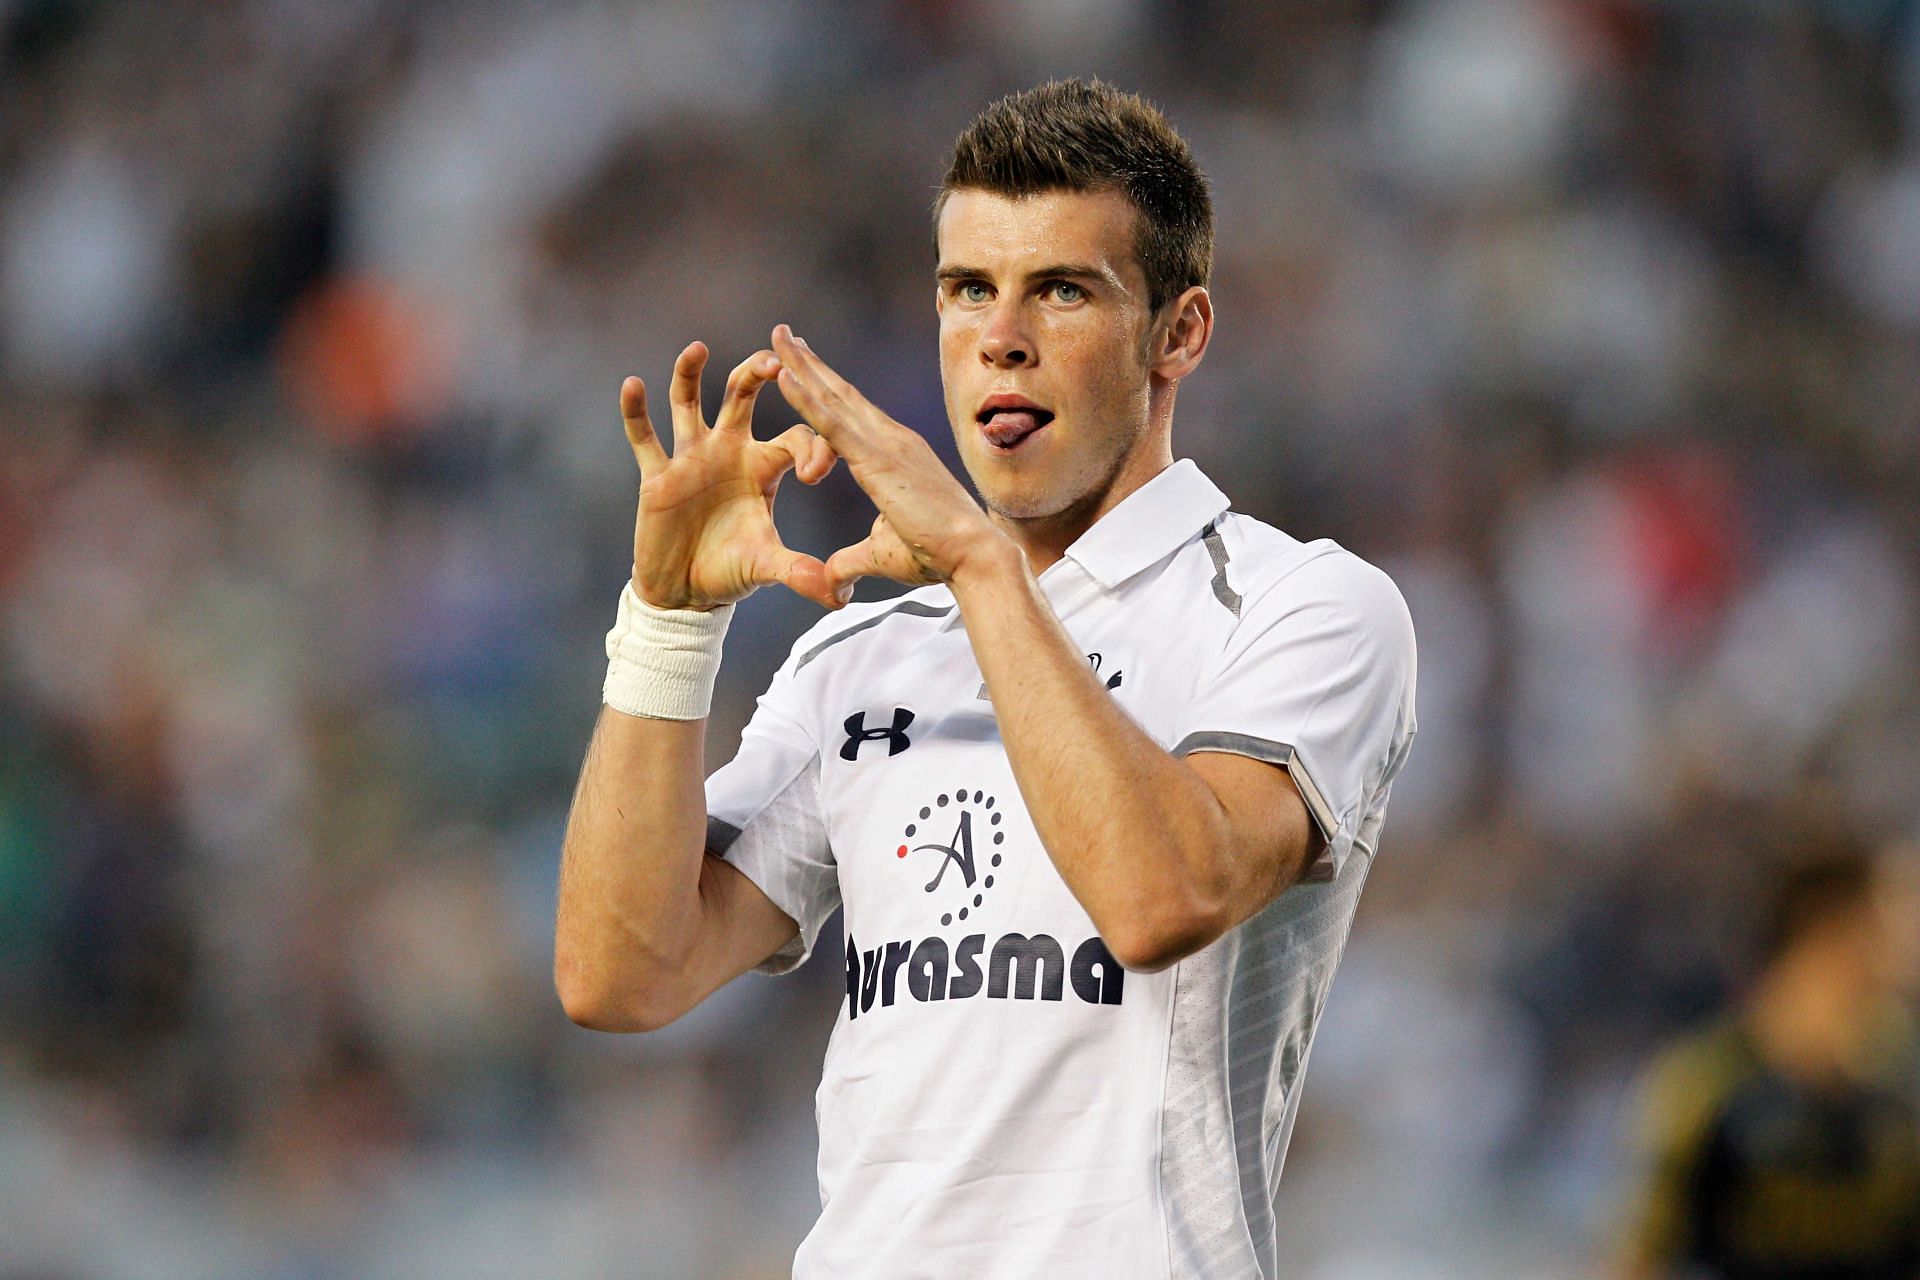 Gareth Bale was a monsterous player while playing for Tottenham Hotspur